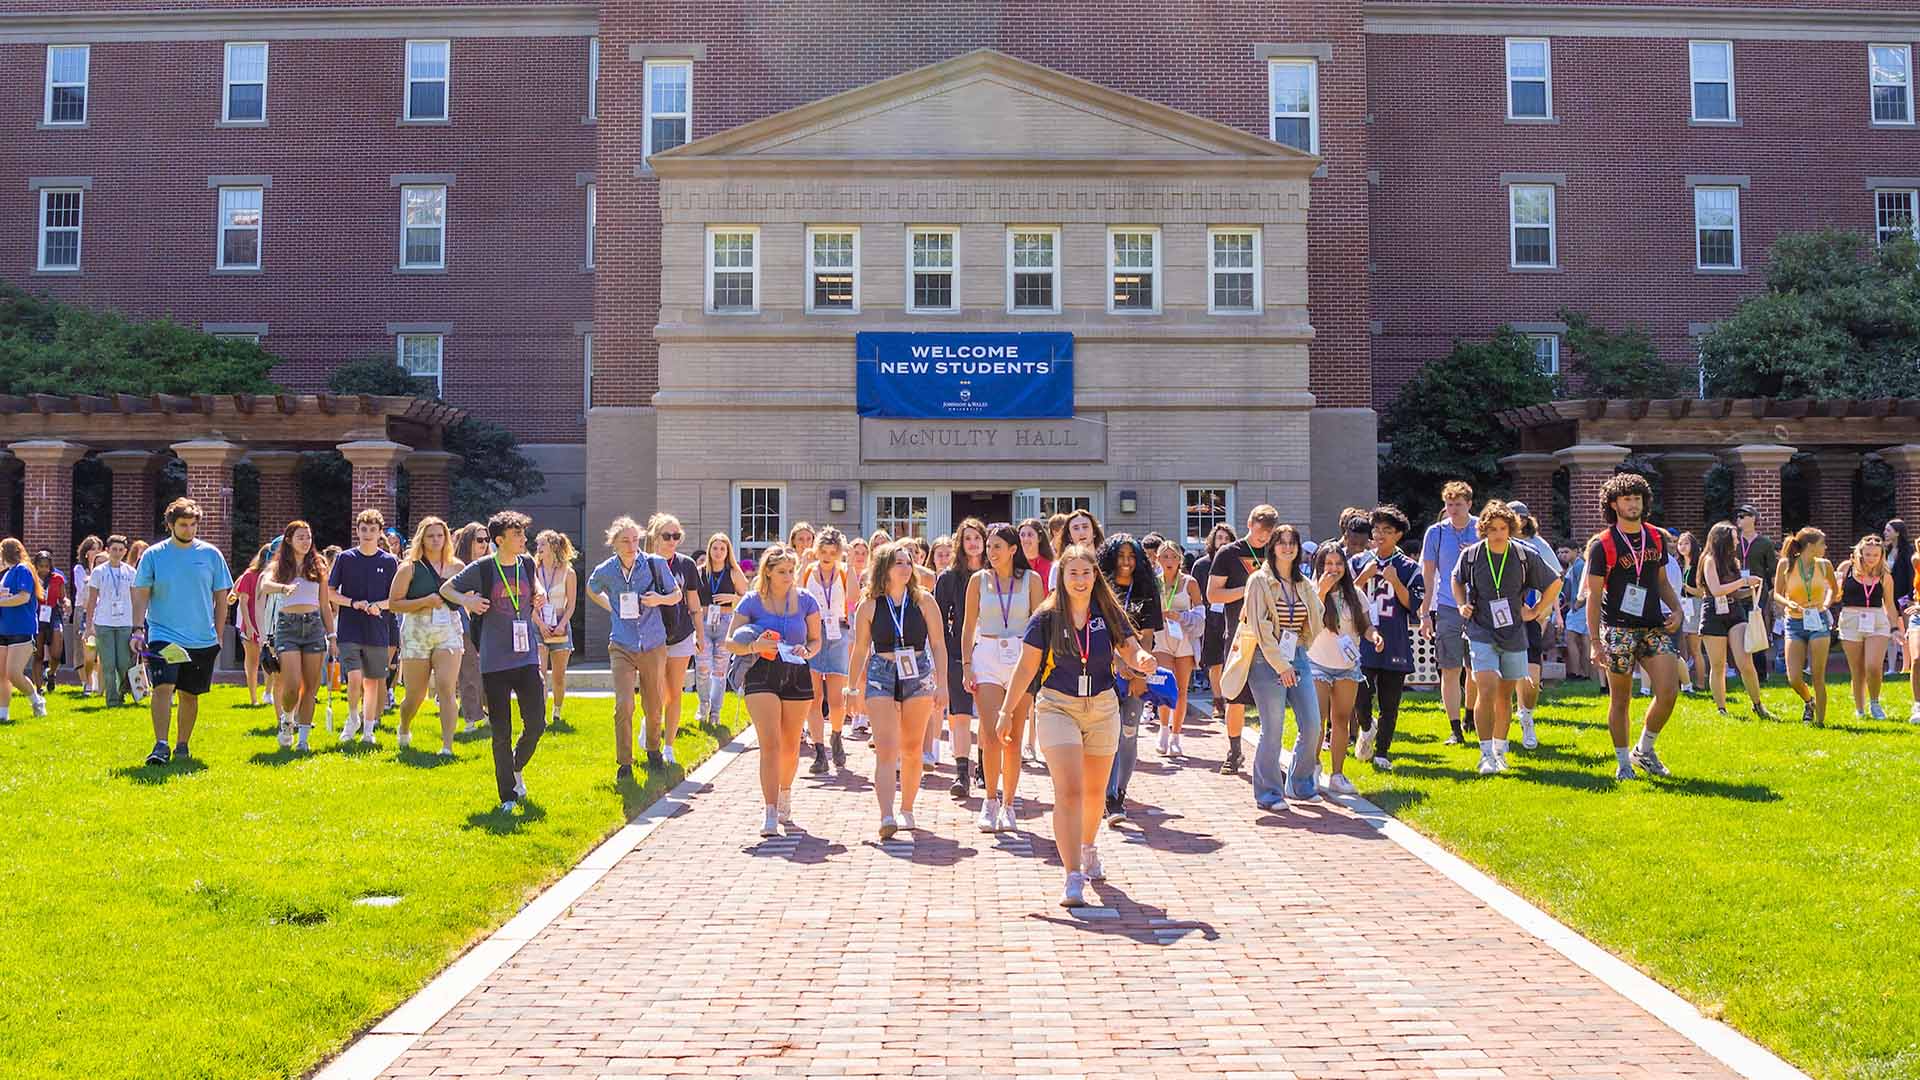 JWU students walking in Gaebe Commons with a sign behind them that reads "Welcome New Students"